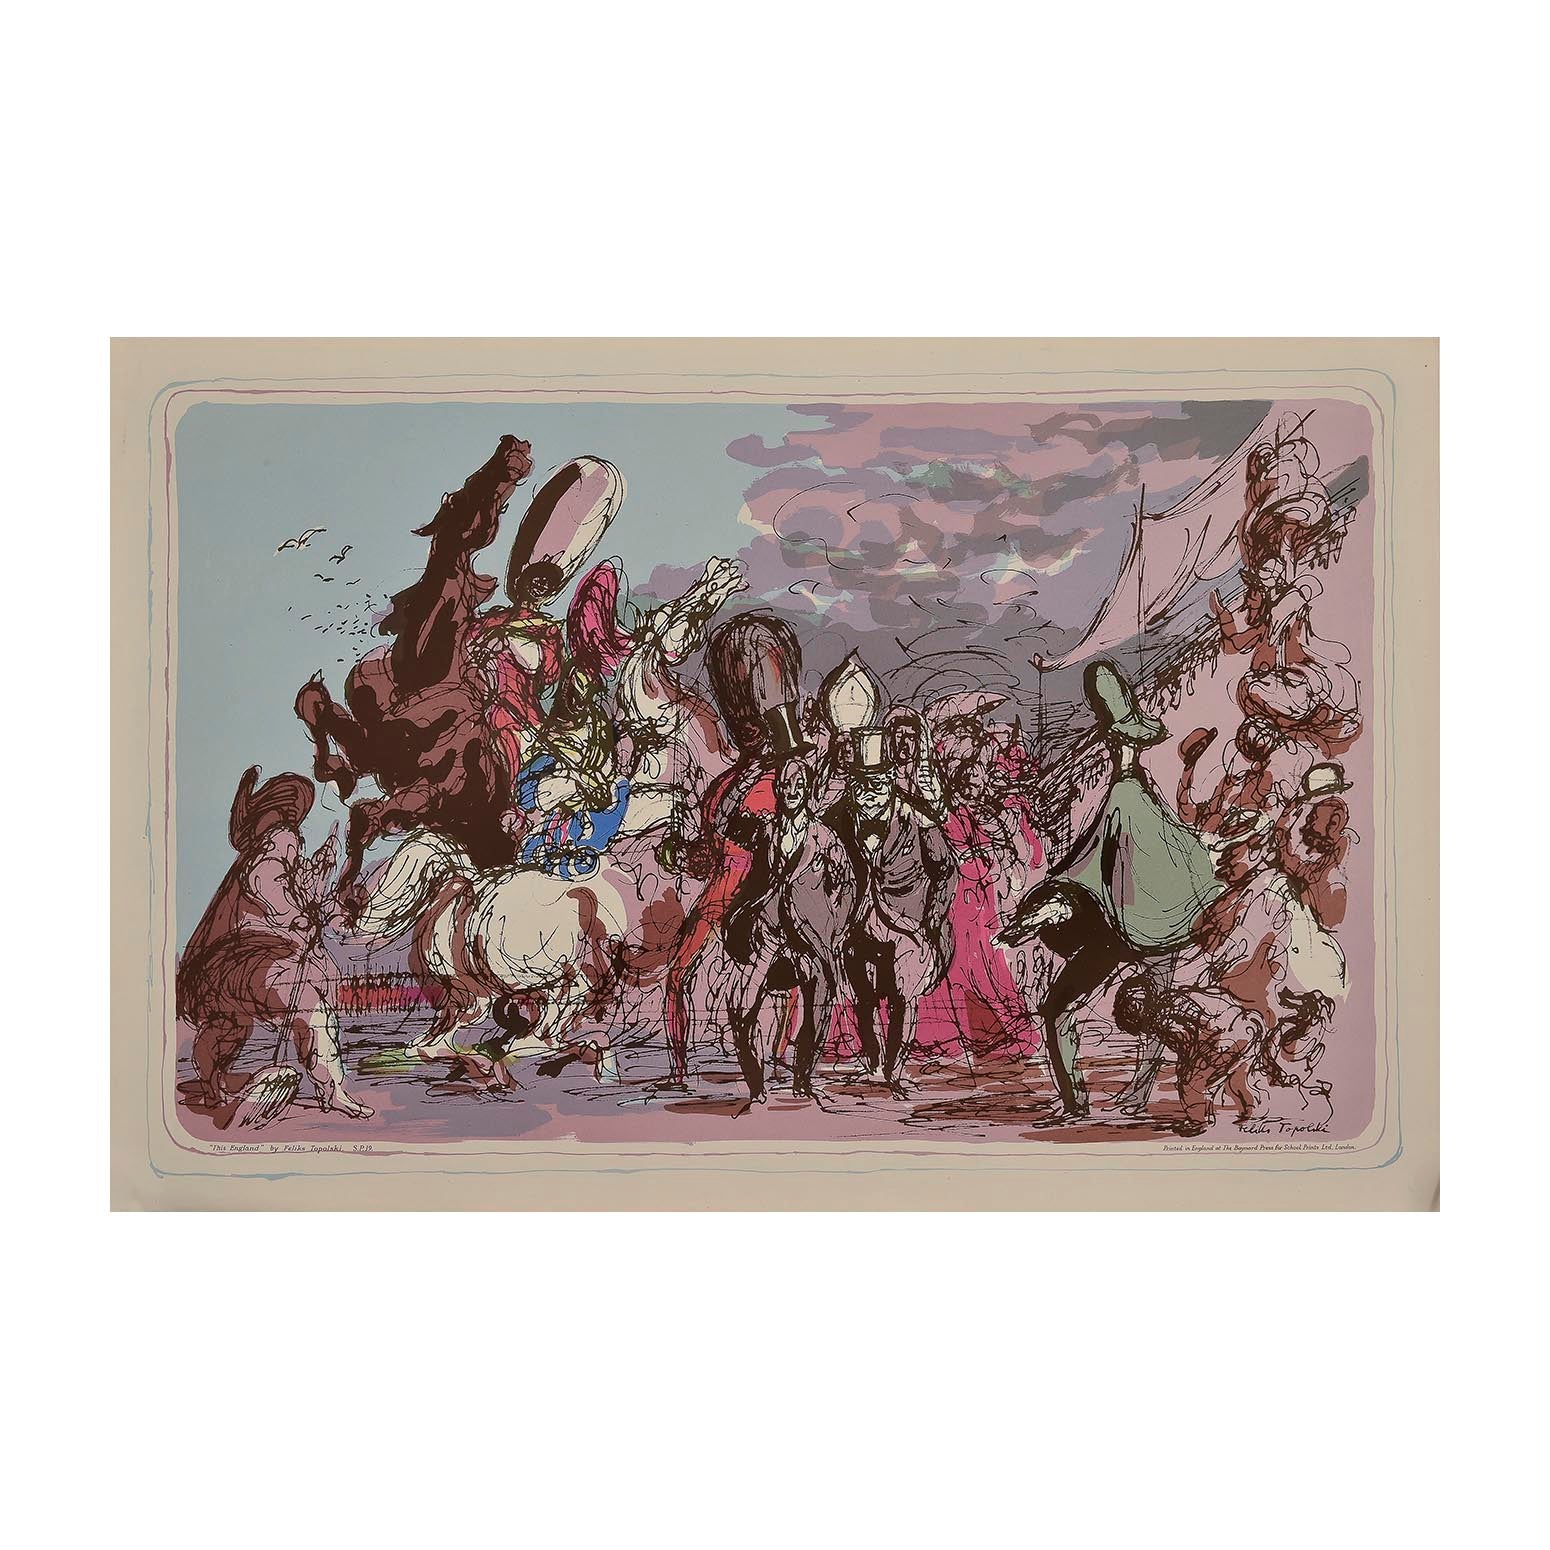 Original ‘School Print’, This England, painted by Feliks Topolski and published by School Prints Ltd, 1947. The design depicts a ceremonial procession, headed by Prime Minister Clement Atlee and his predecessor Winston Churchill, flanked by London ‘characters’, including guardsmen, a crossing sweeper and a policeman.